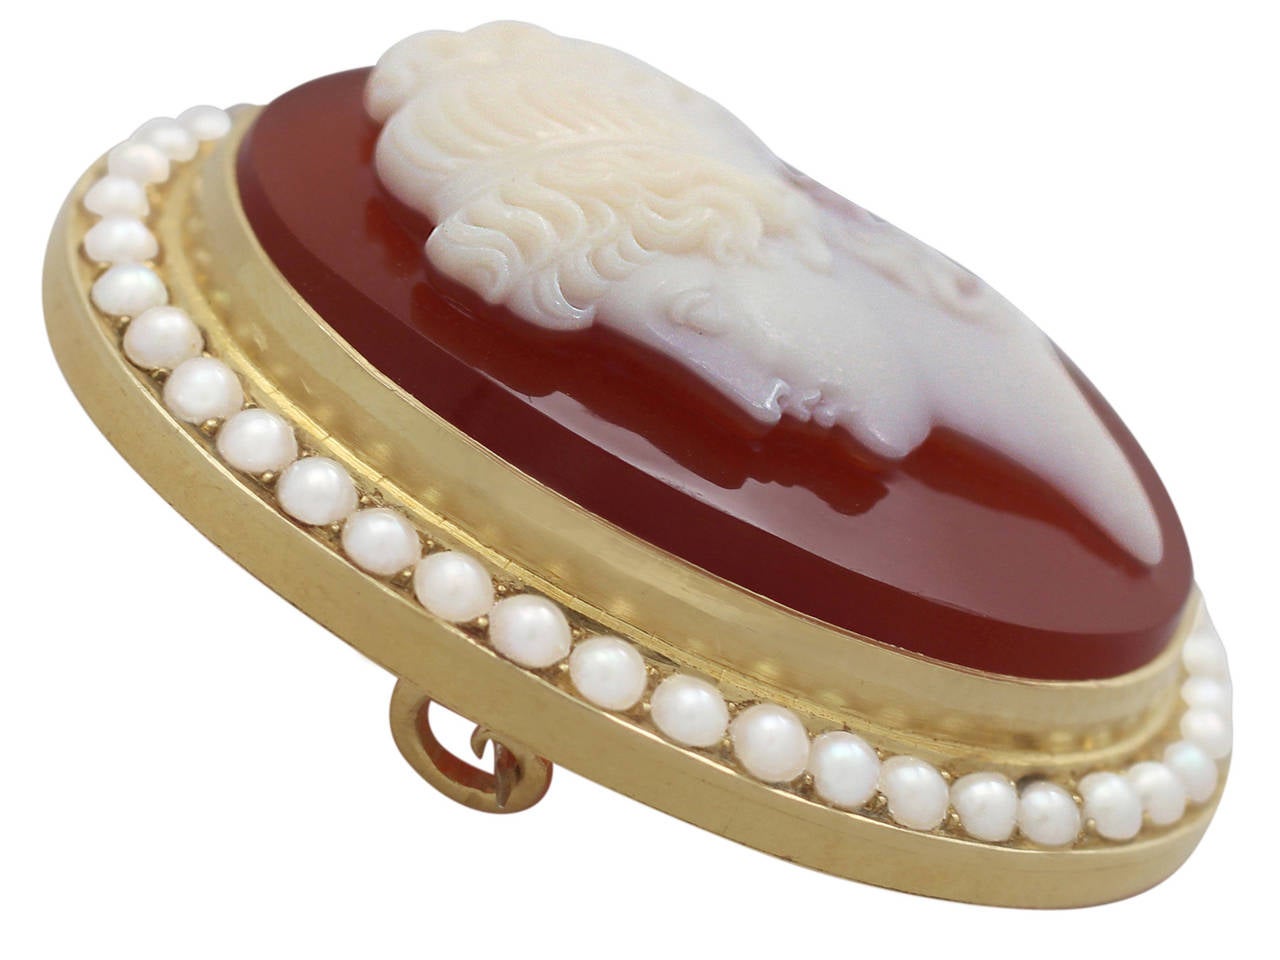 Cameo Brooch with Pearls, 15 Karat Yellow Gold, Antique Victorian 1